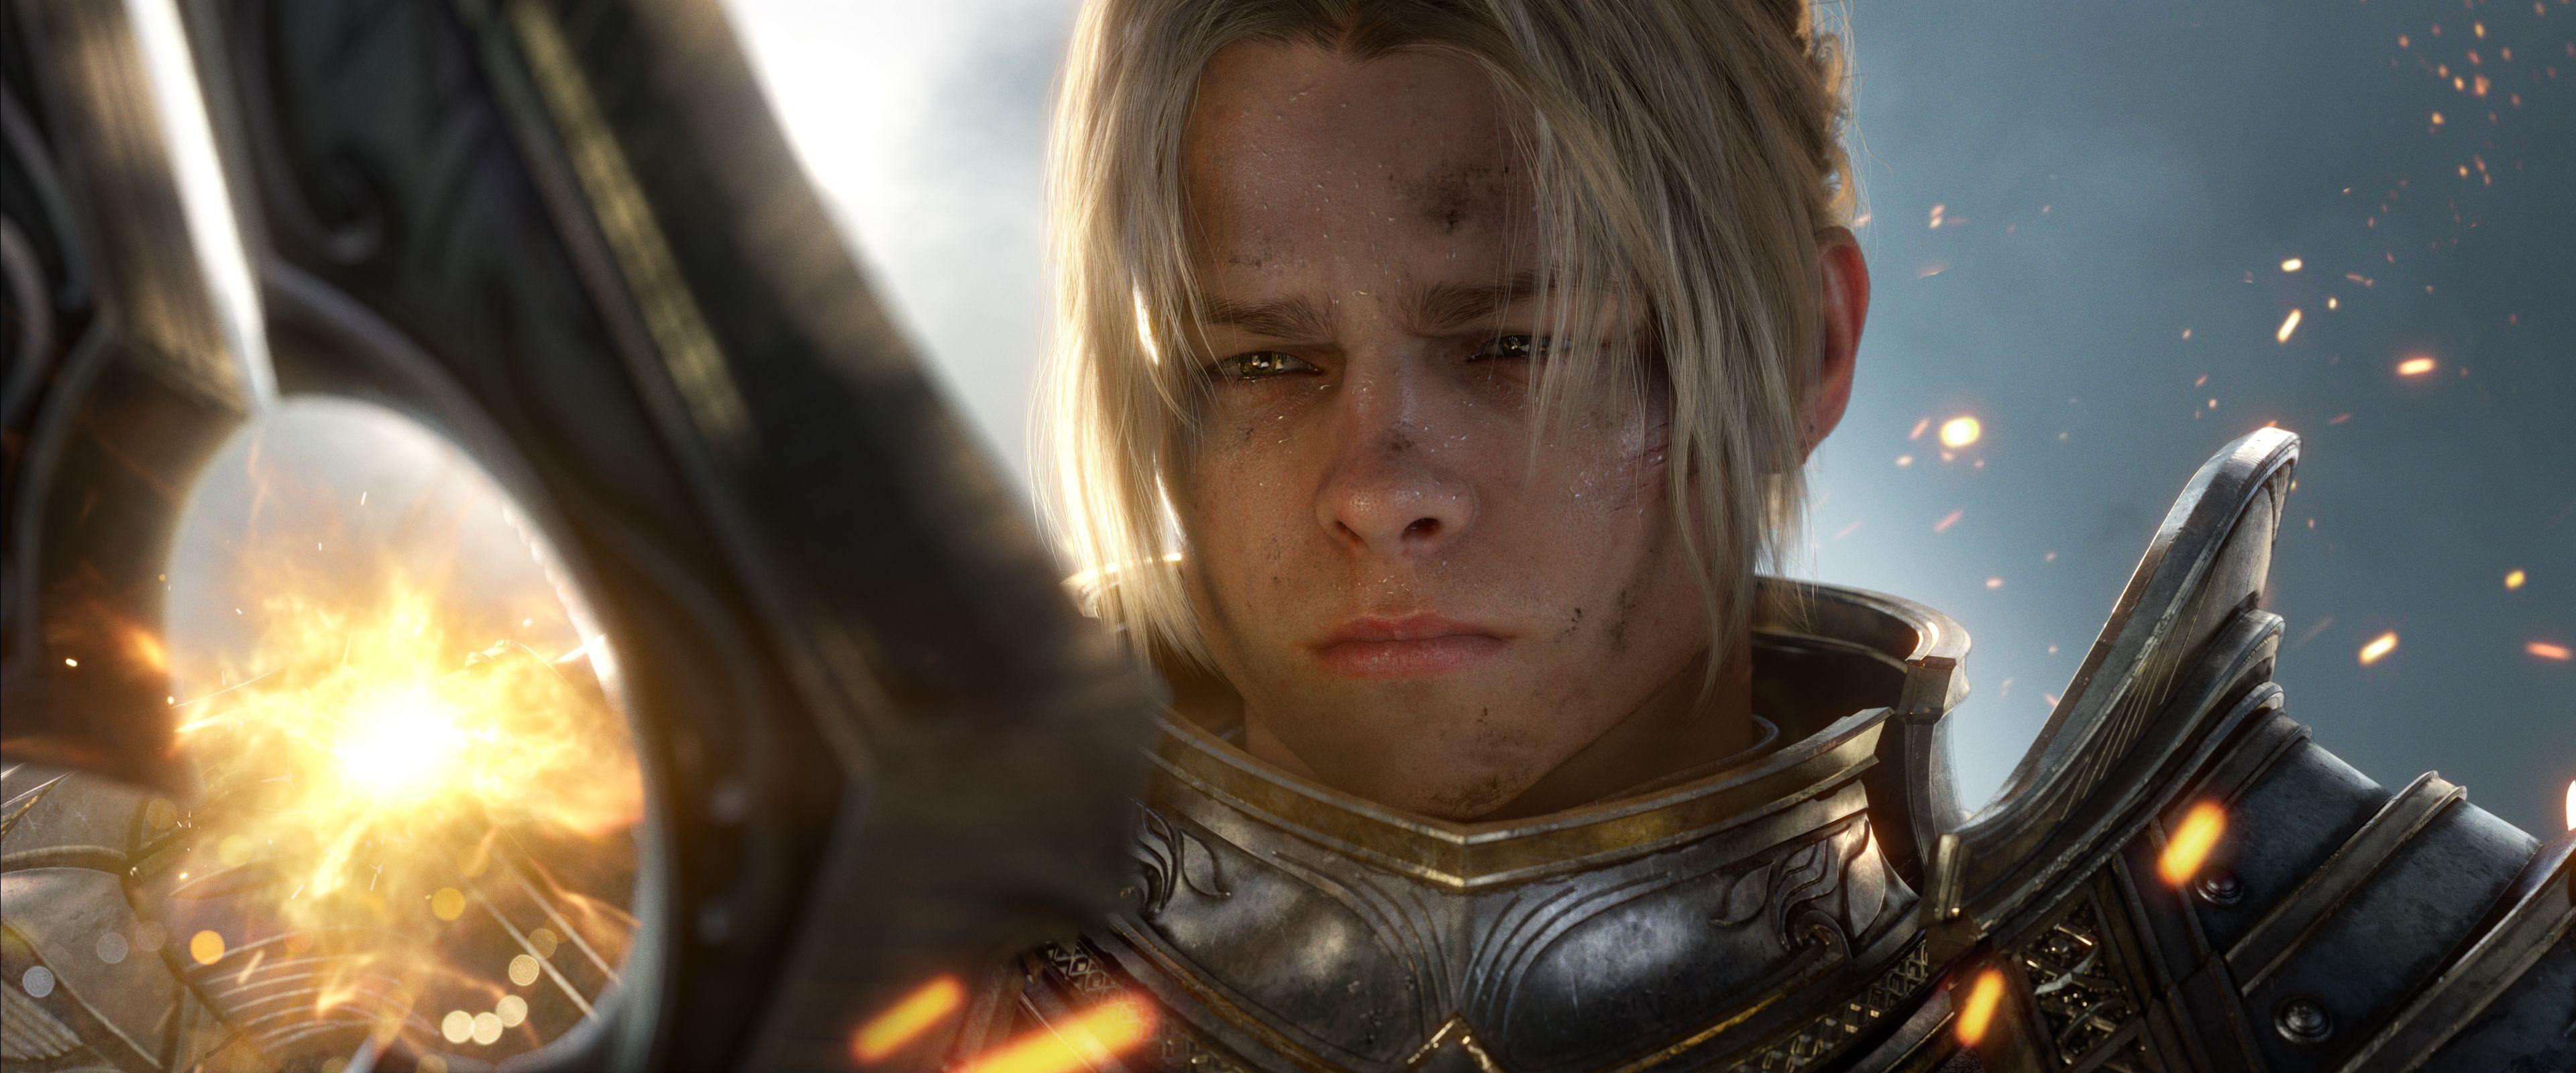 Wallpaper Anduin, World of Warcraft: Battle for Azeroth, 4K, Games